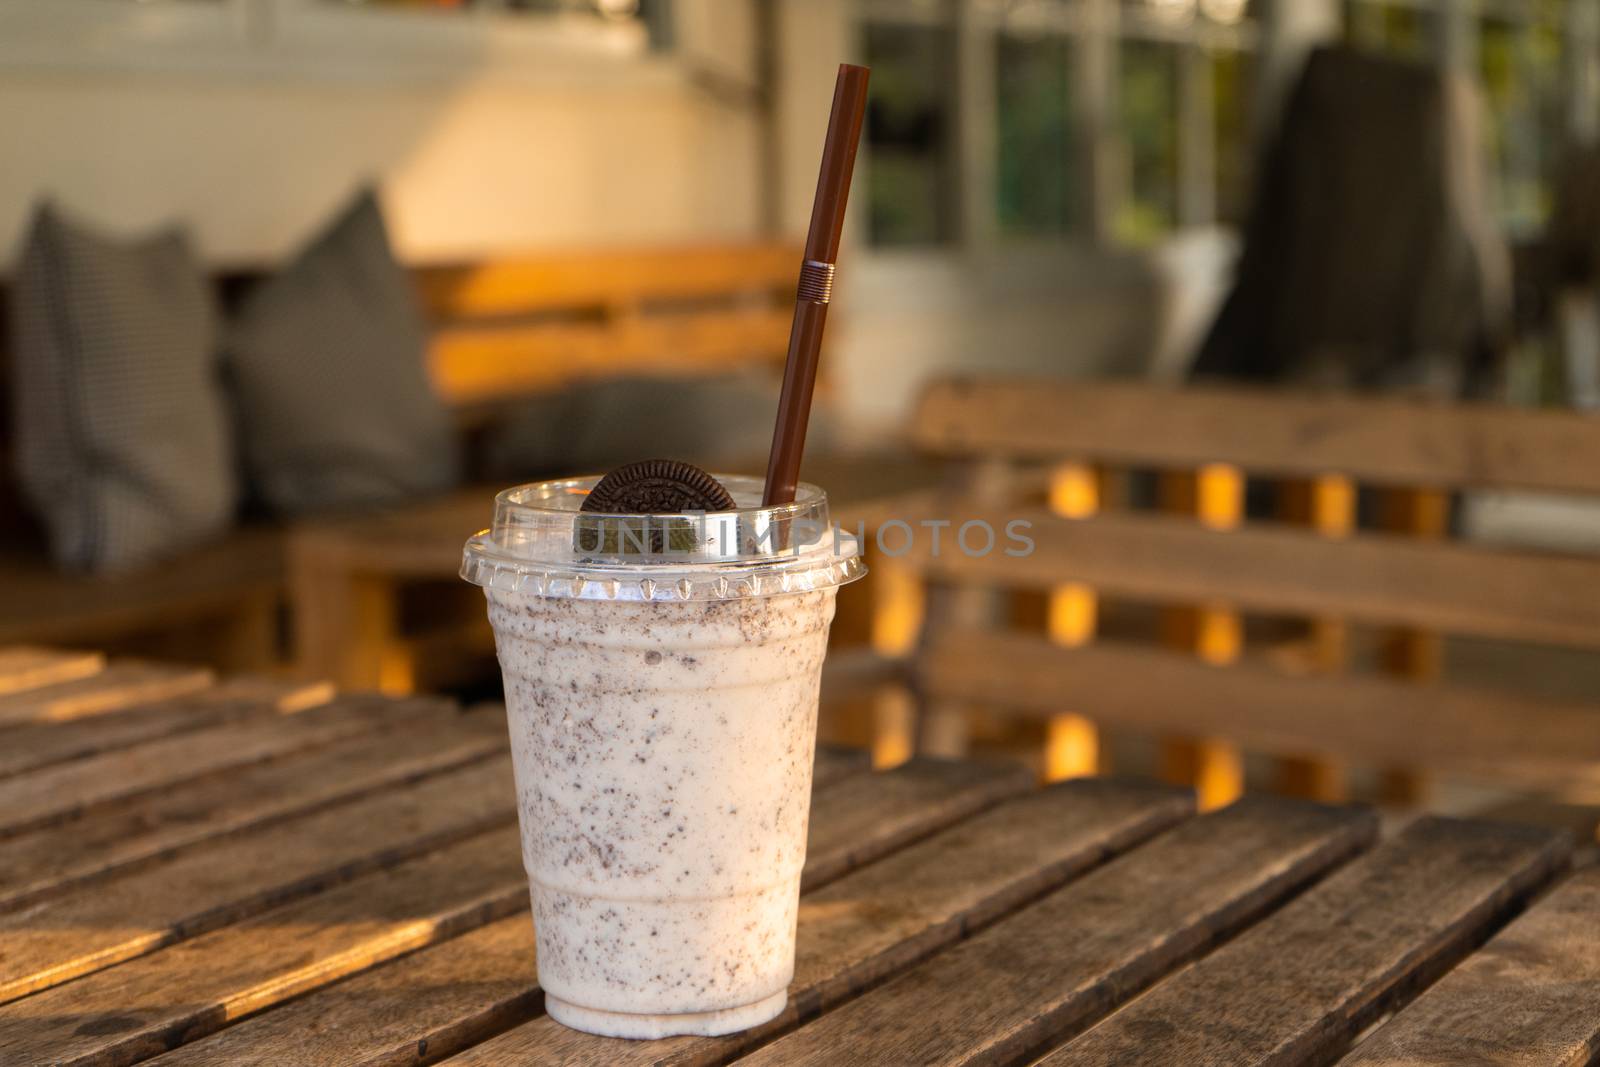 Milkshake with ice cream and cookies. Cool and refreshing on a hot day.